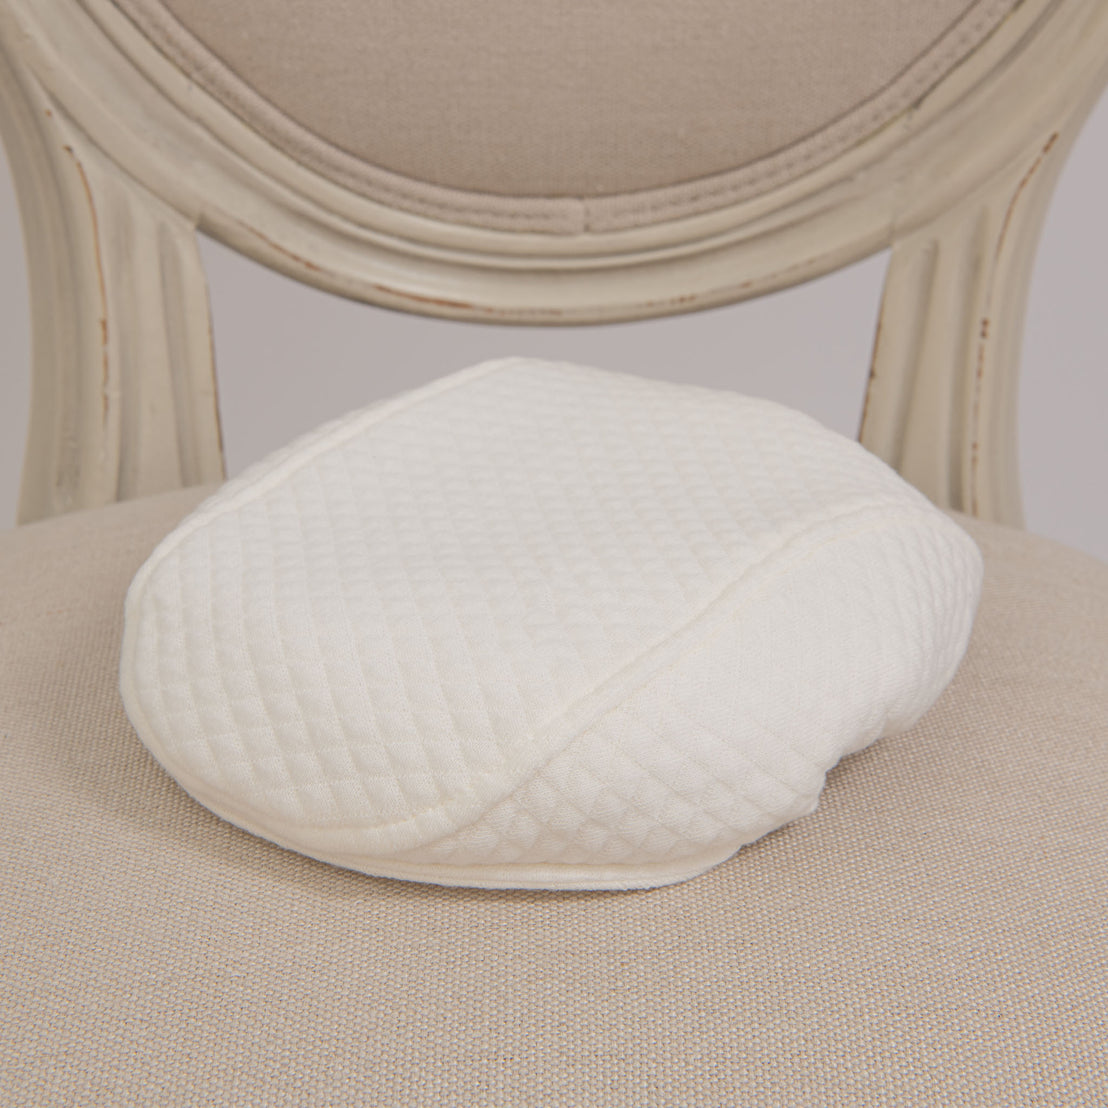 Flat lay photo of the Owen Cotton Newsboy Cap on a chair. The hat is made with ivory quilted cotton